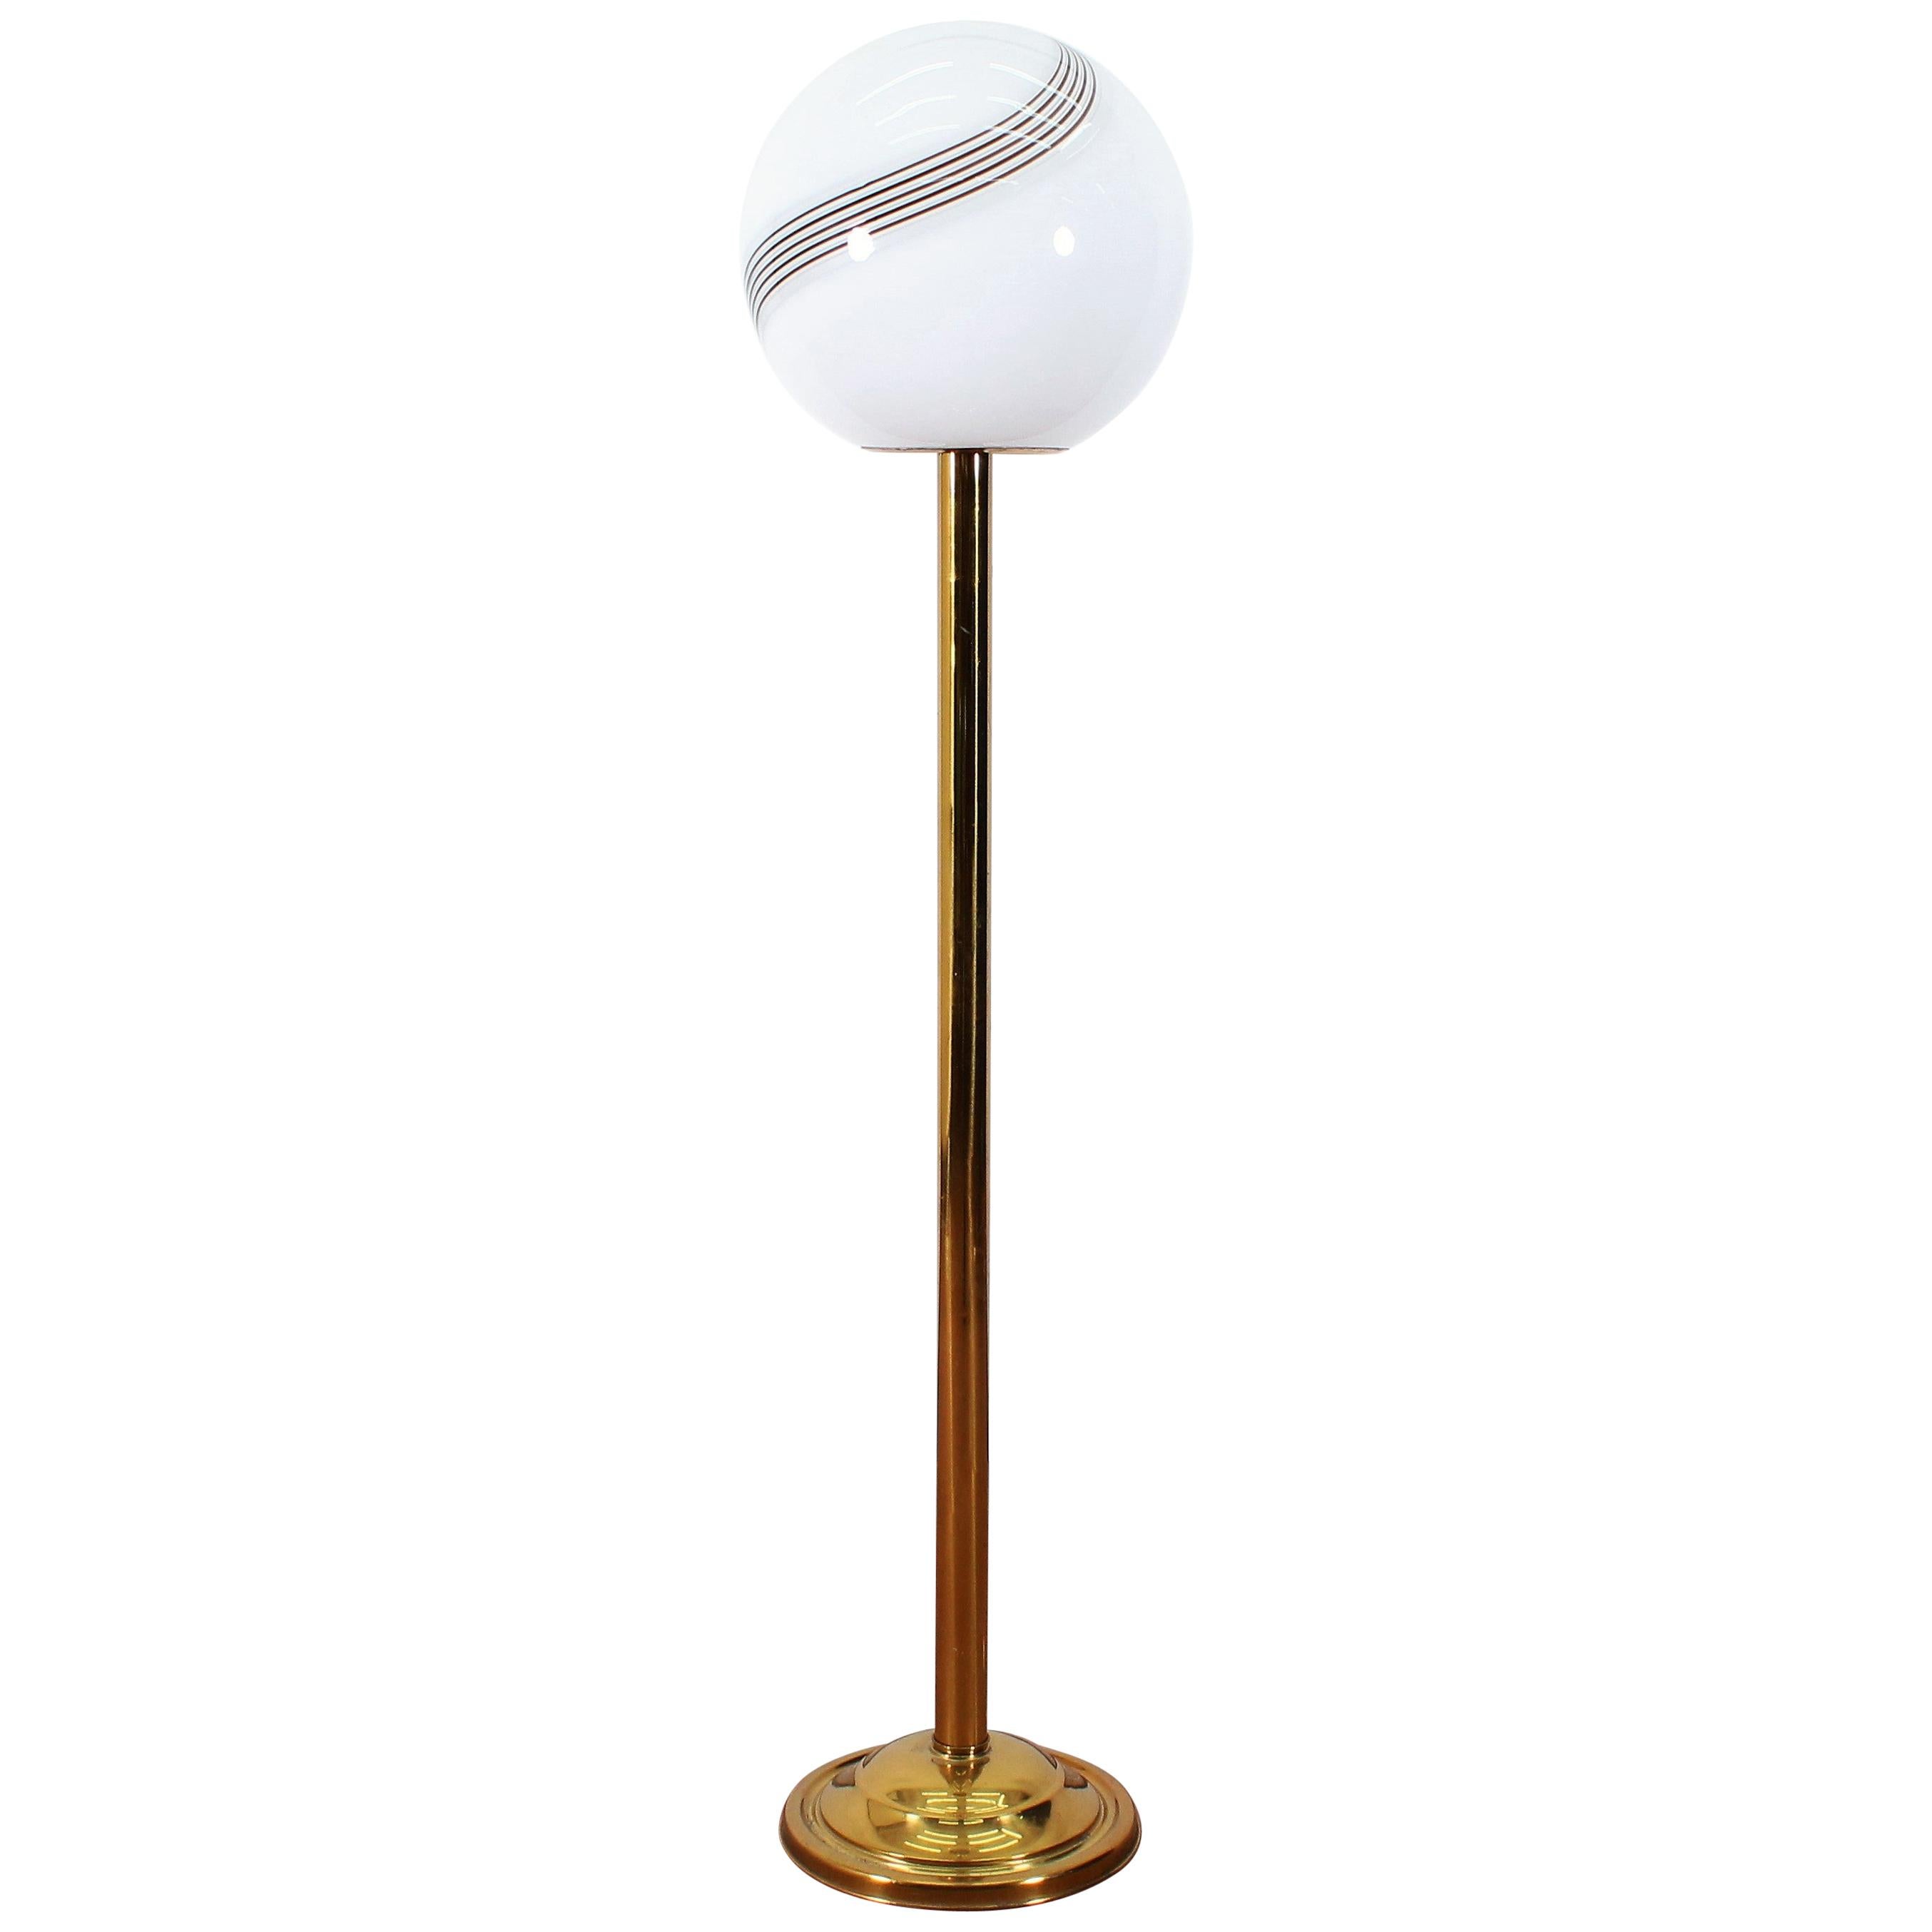 Midcentury White Opaline and Metal Floor Lamp after M. Vignelli, Italy, 1970s